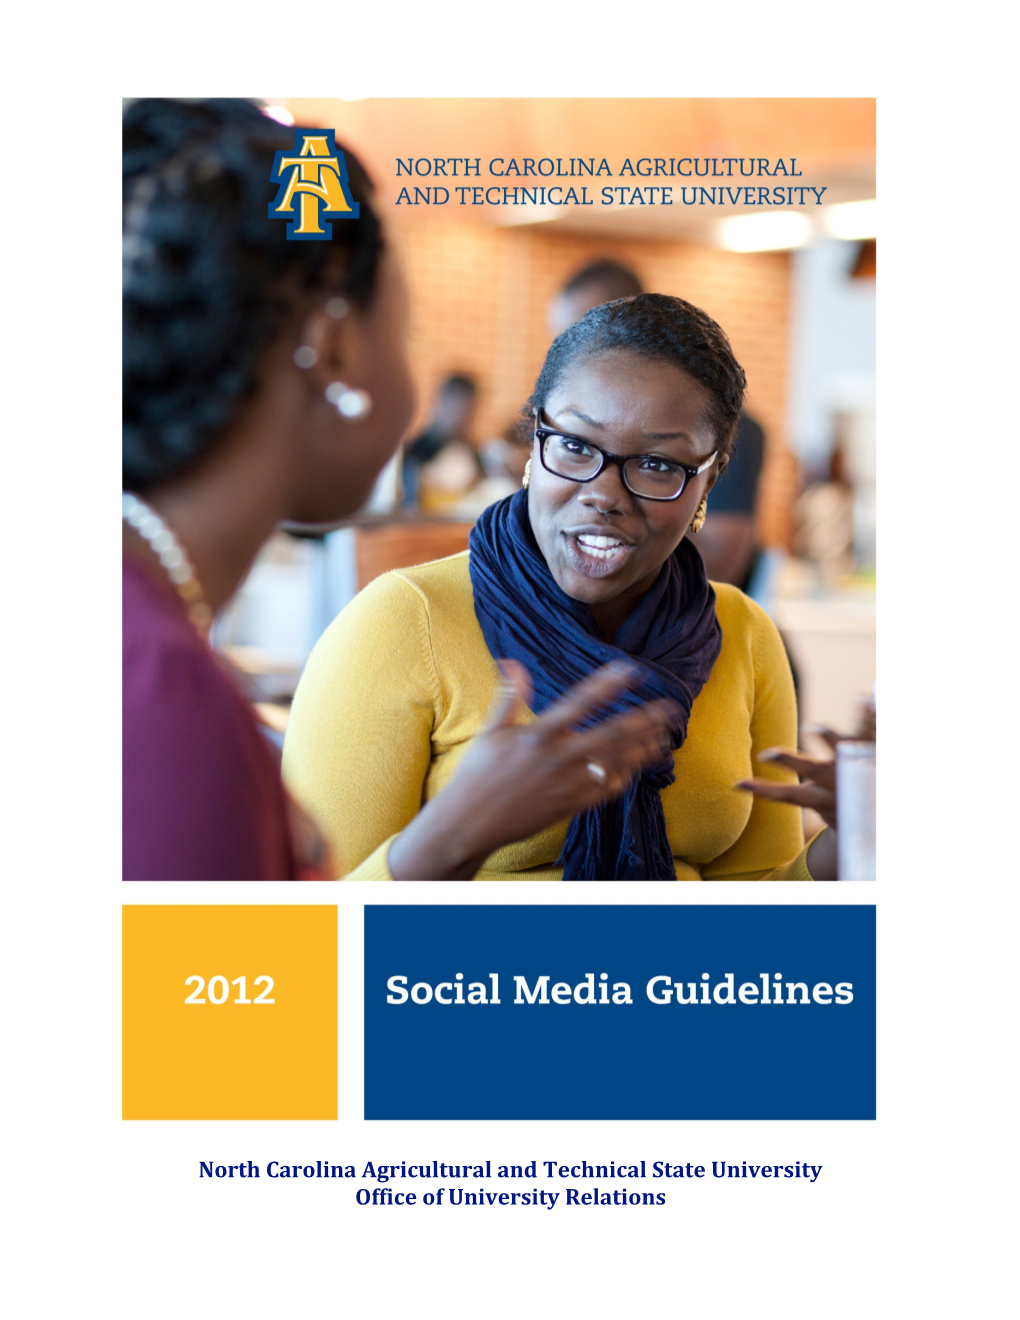 Guidelines for Use of Social Media